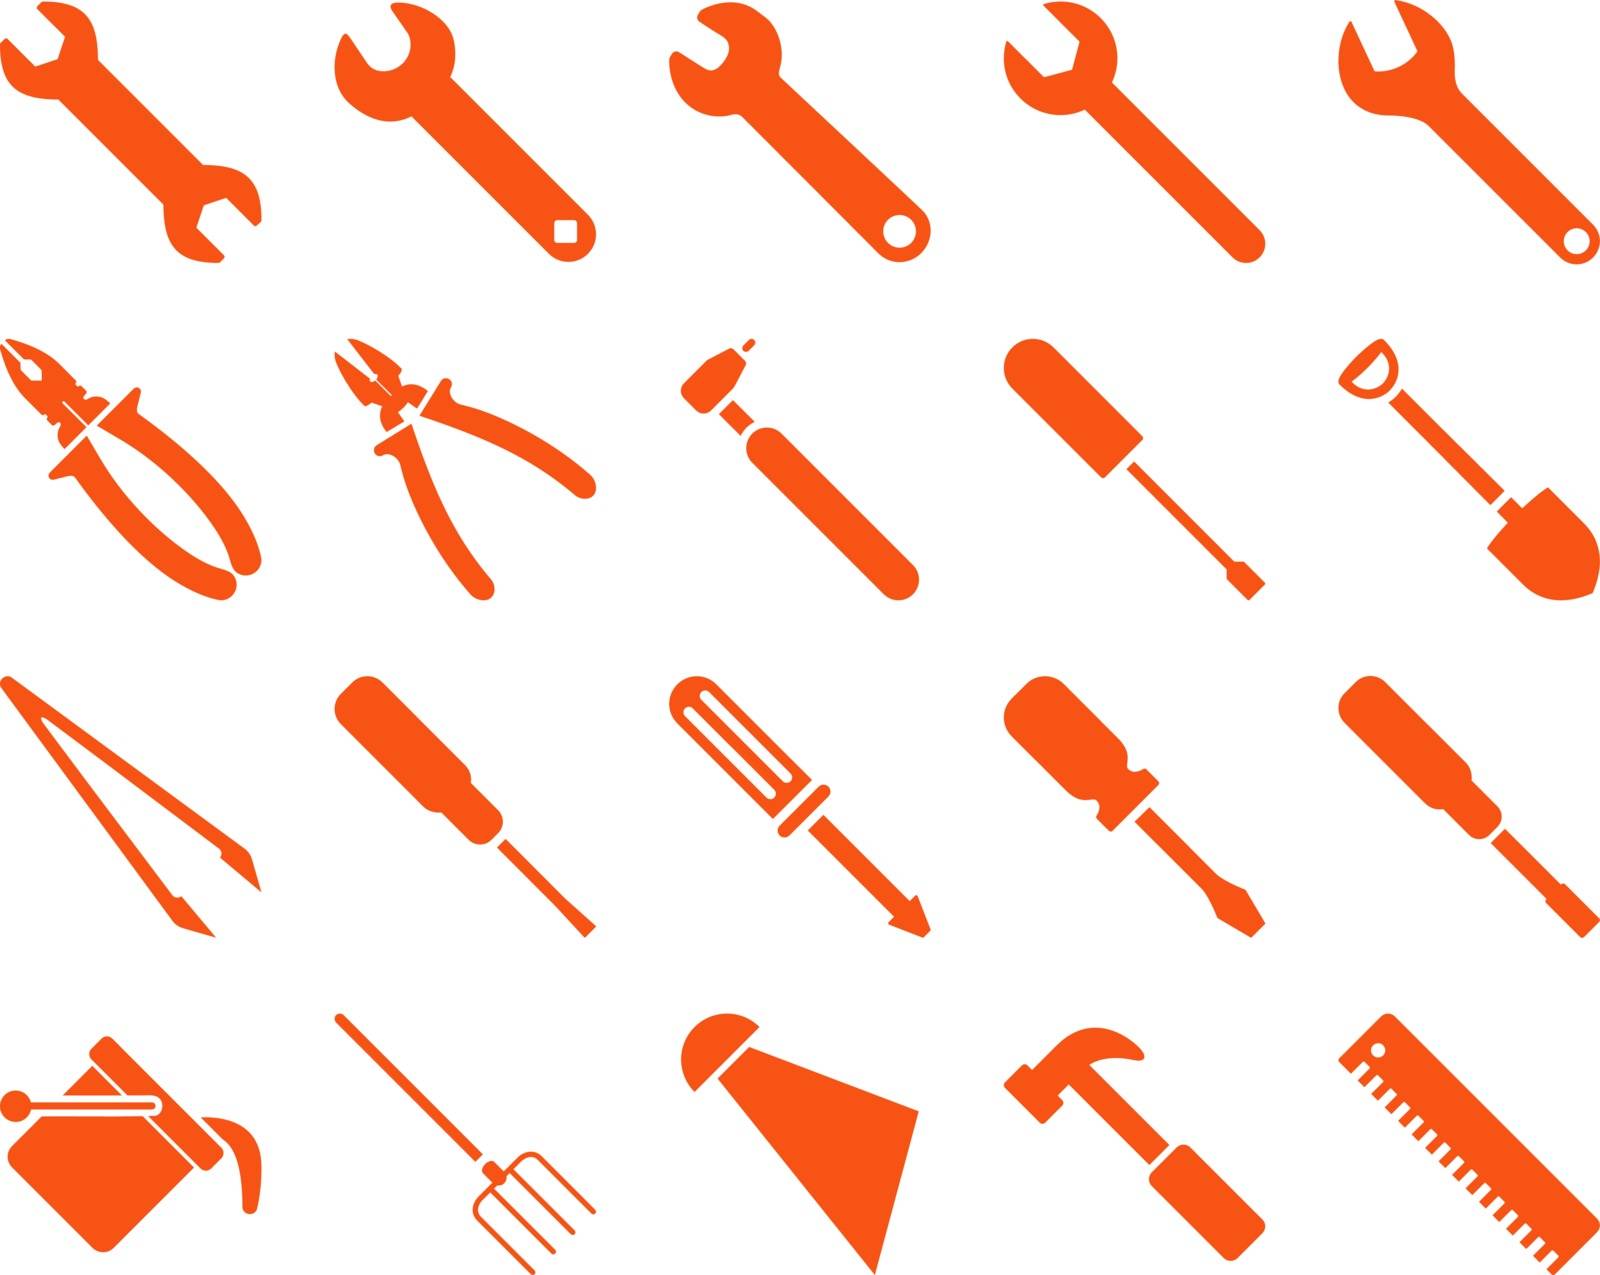 Equipment and Tools Icons by ahasoft